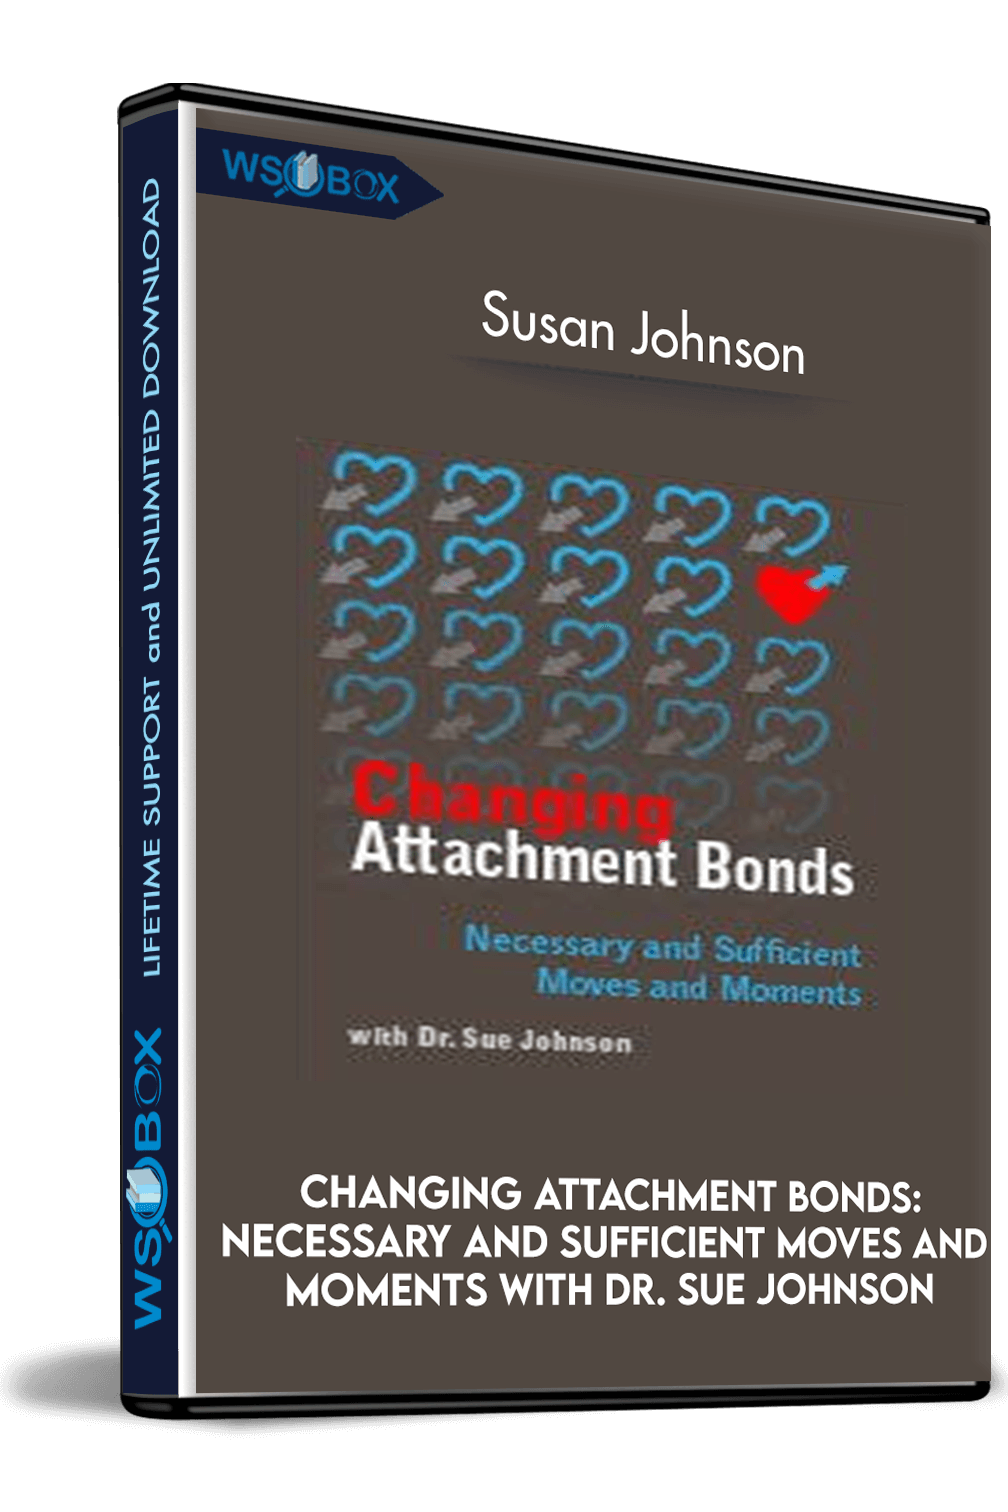 changing-attachment-bonds-necessary-and-sufficient-moves-and-moments-with-dr-sue-johnson-susan-johnson